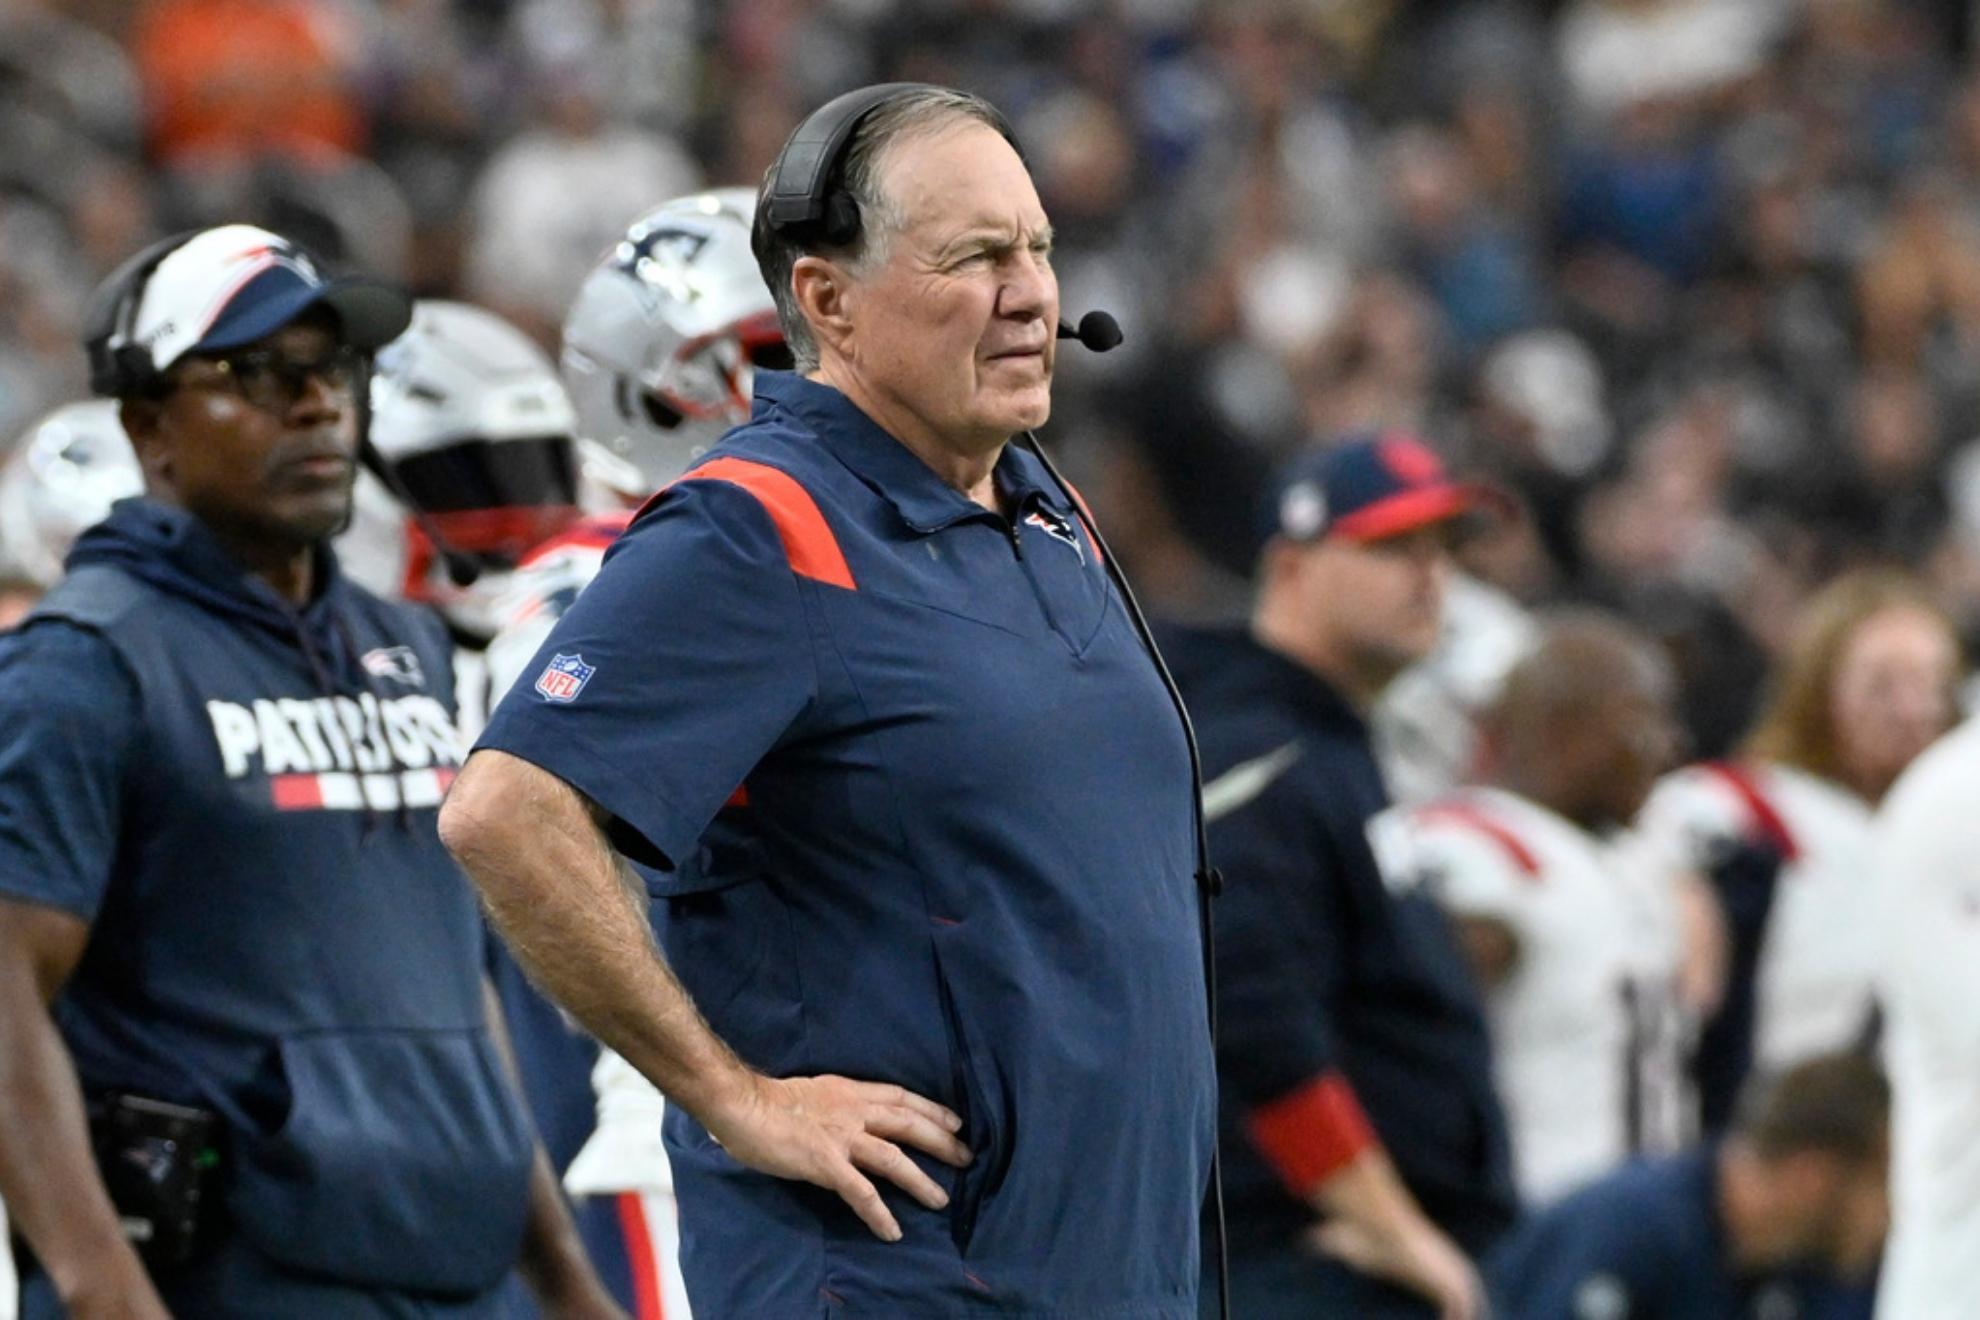 Belichick is having a nightmare season with the Patriots